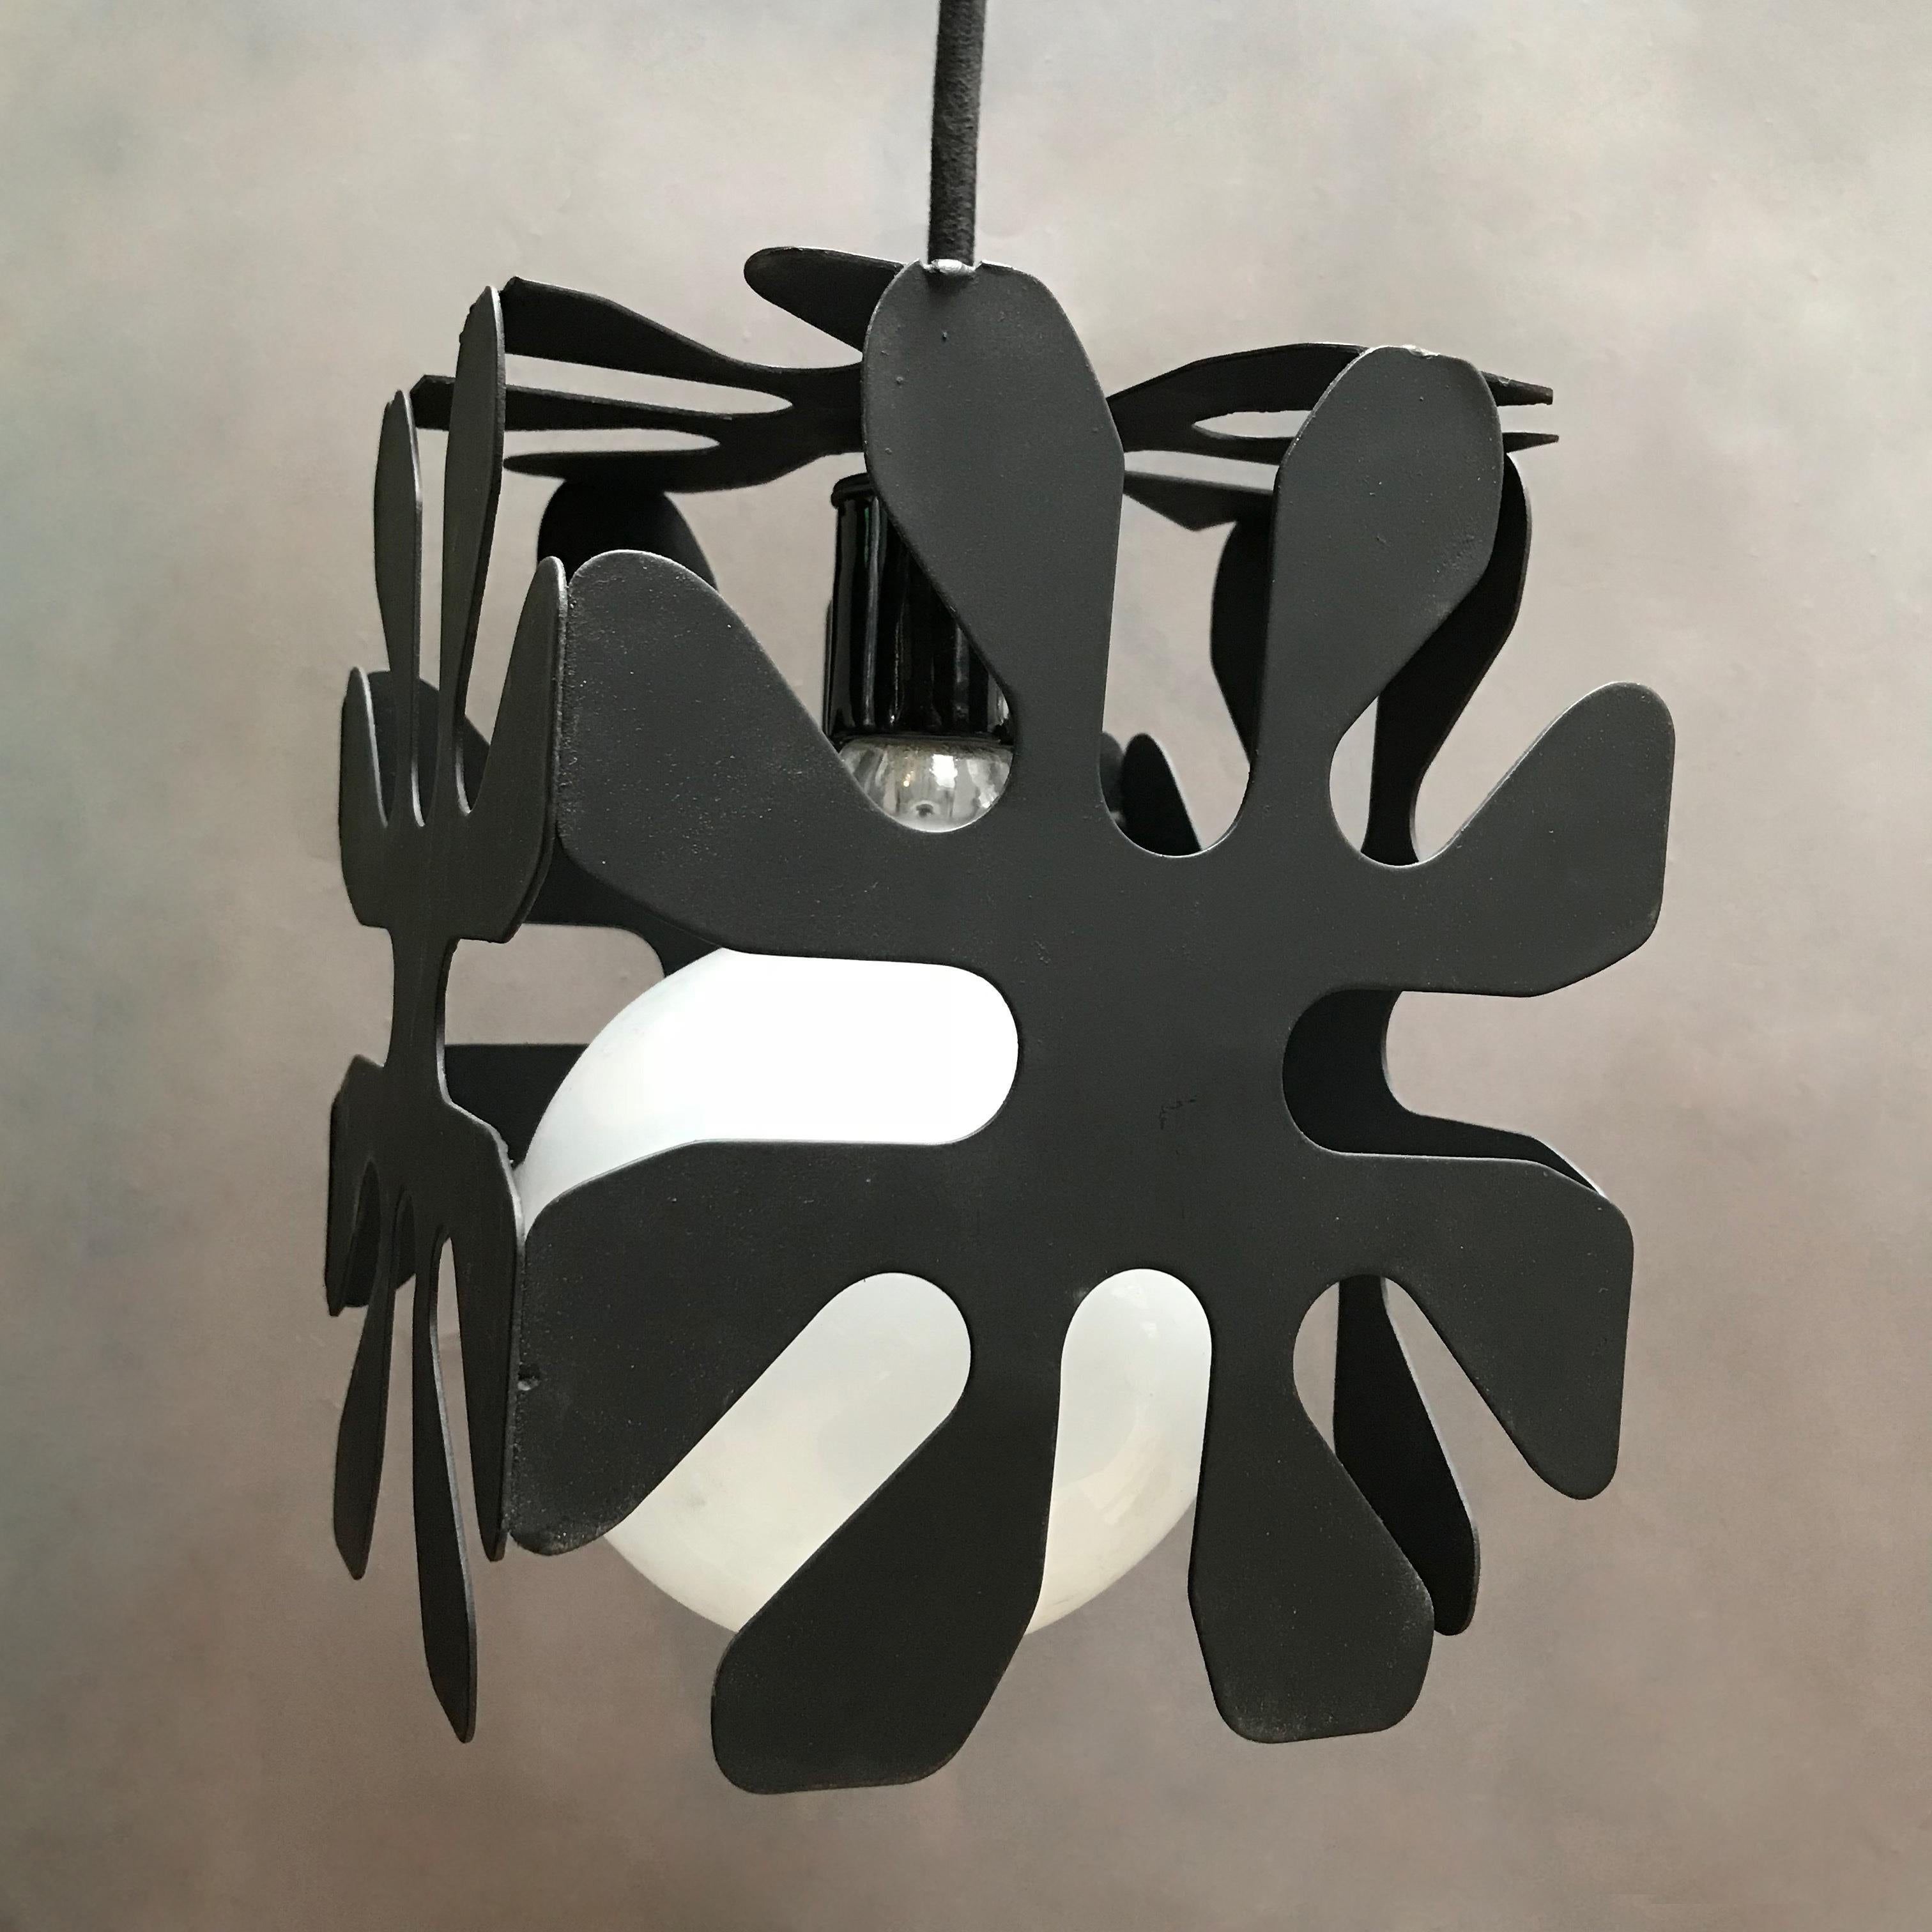 20th Century Mid-Century Modern Wrought Iron Cubed Flower Pendant Light For Sale